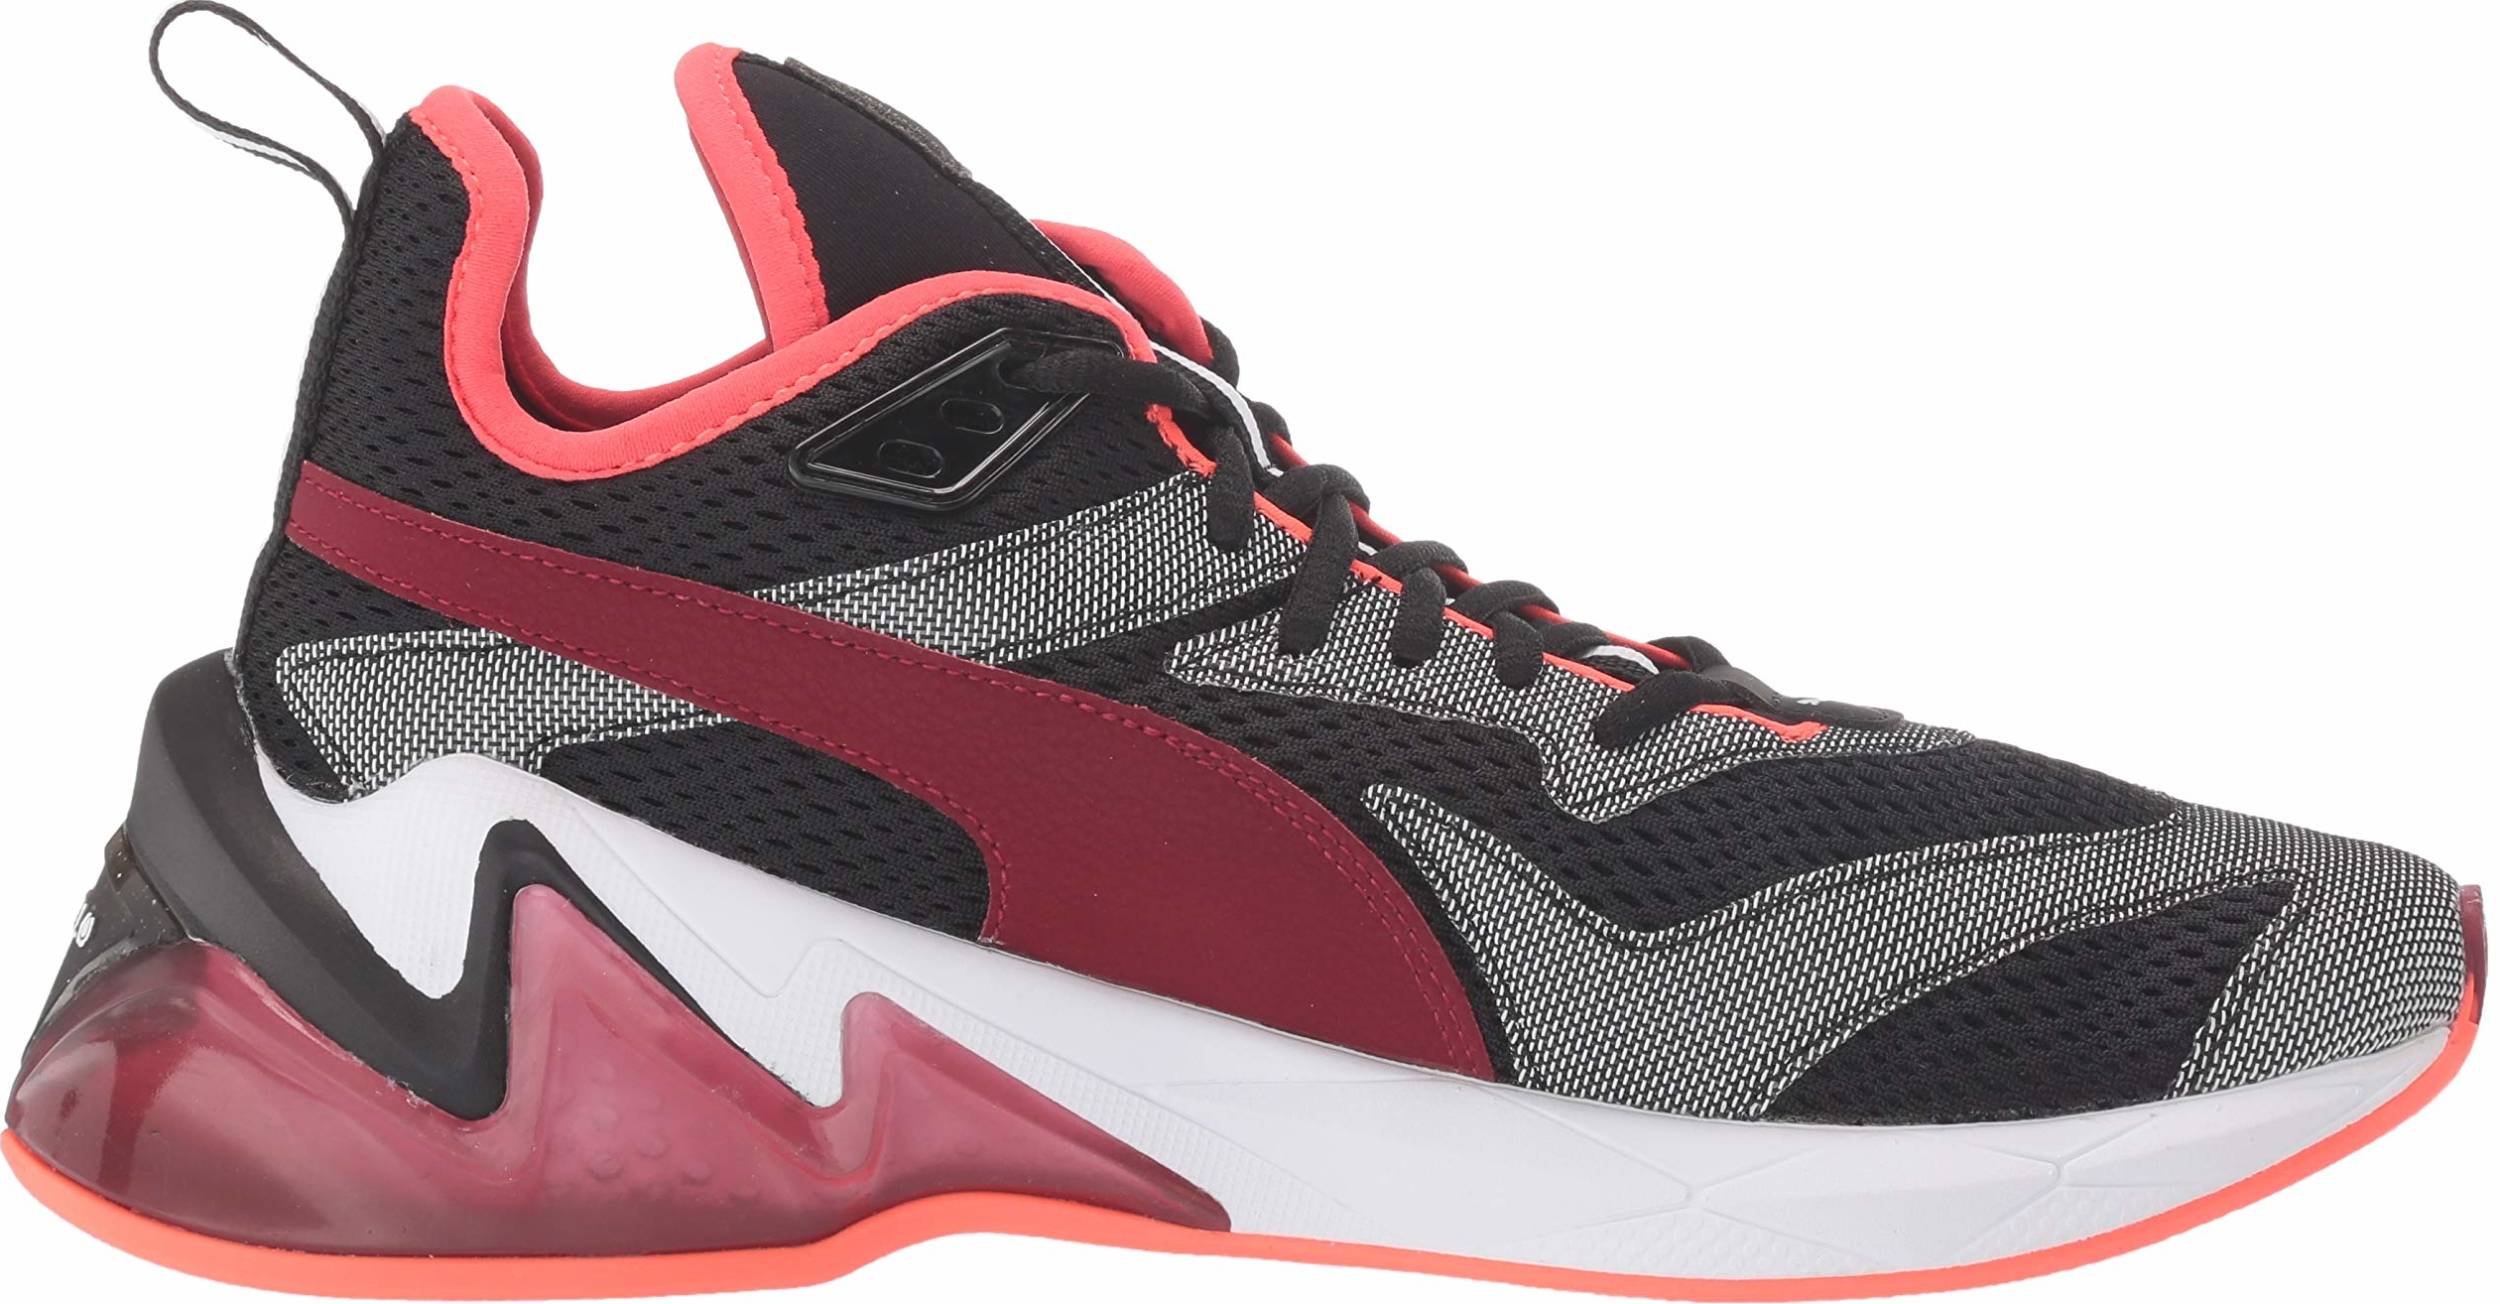 Puma LQDCELL Origin sneakers in 10 colors (only $40) | RunRepeat